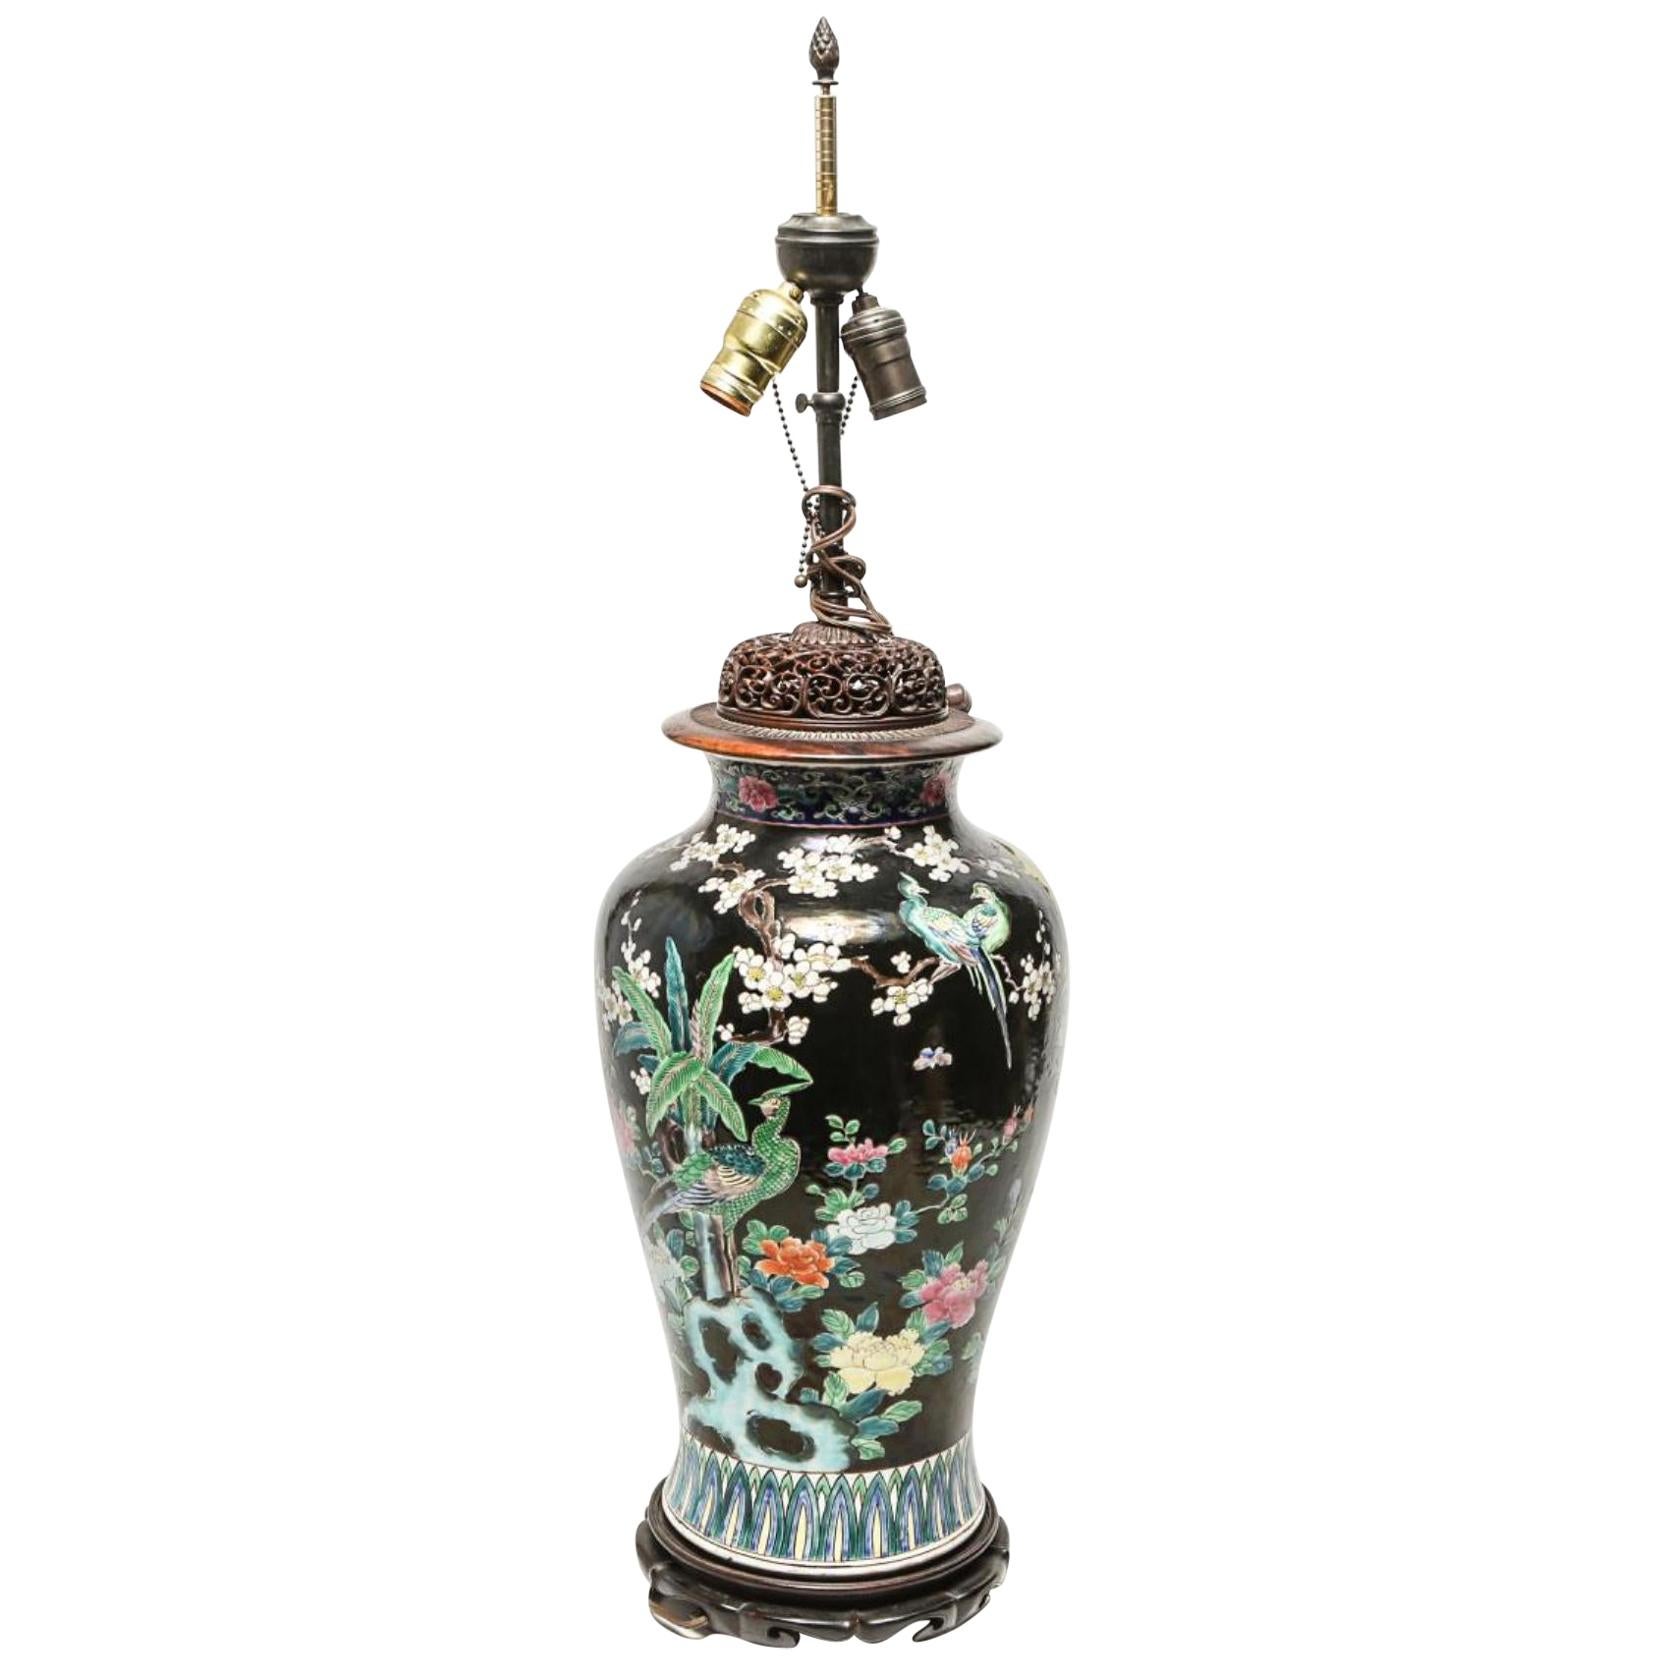 Chinese Famille Noire Porcelain Floral Motif Balluster Jar Mounted as Table Lamp